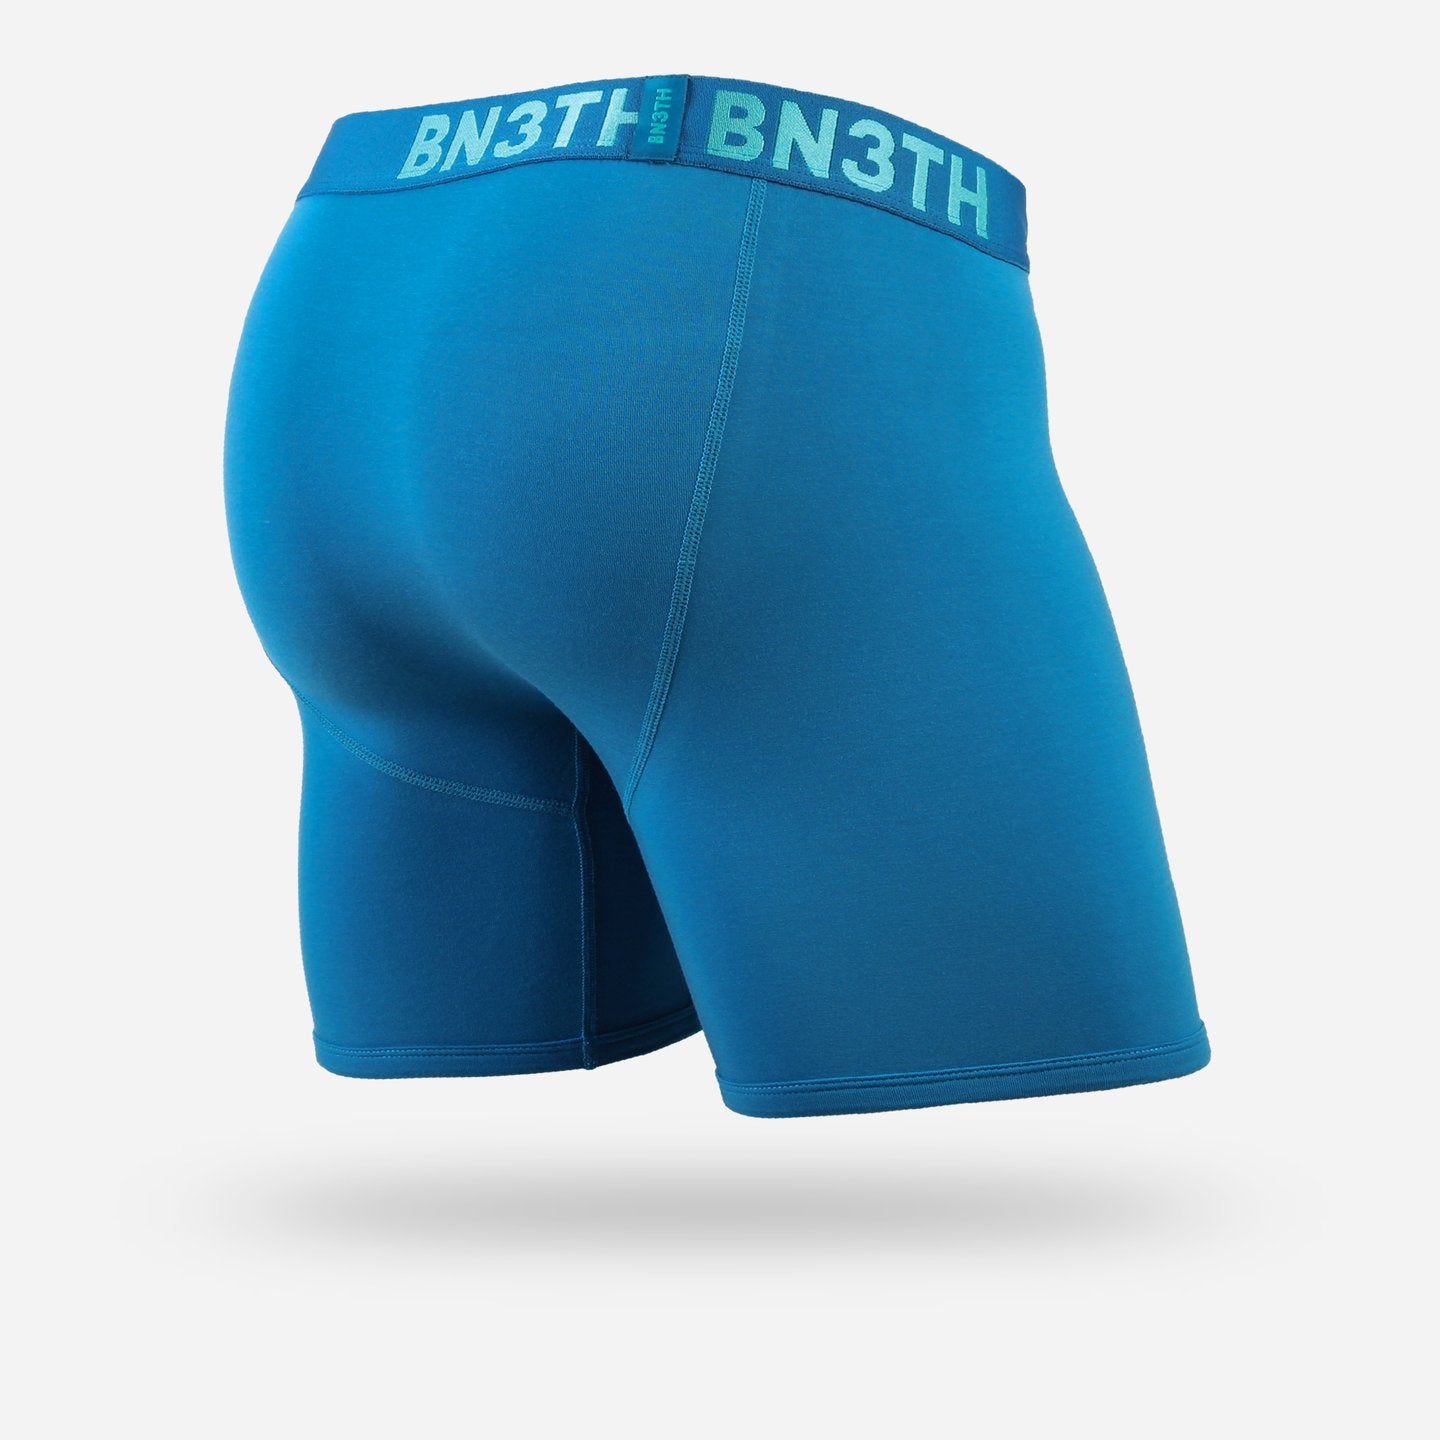 BN3TH Yosemite Classic Boxer Brief – Broderick's Clothing Co.